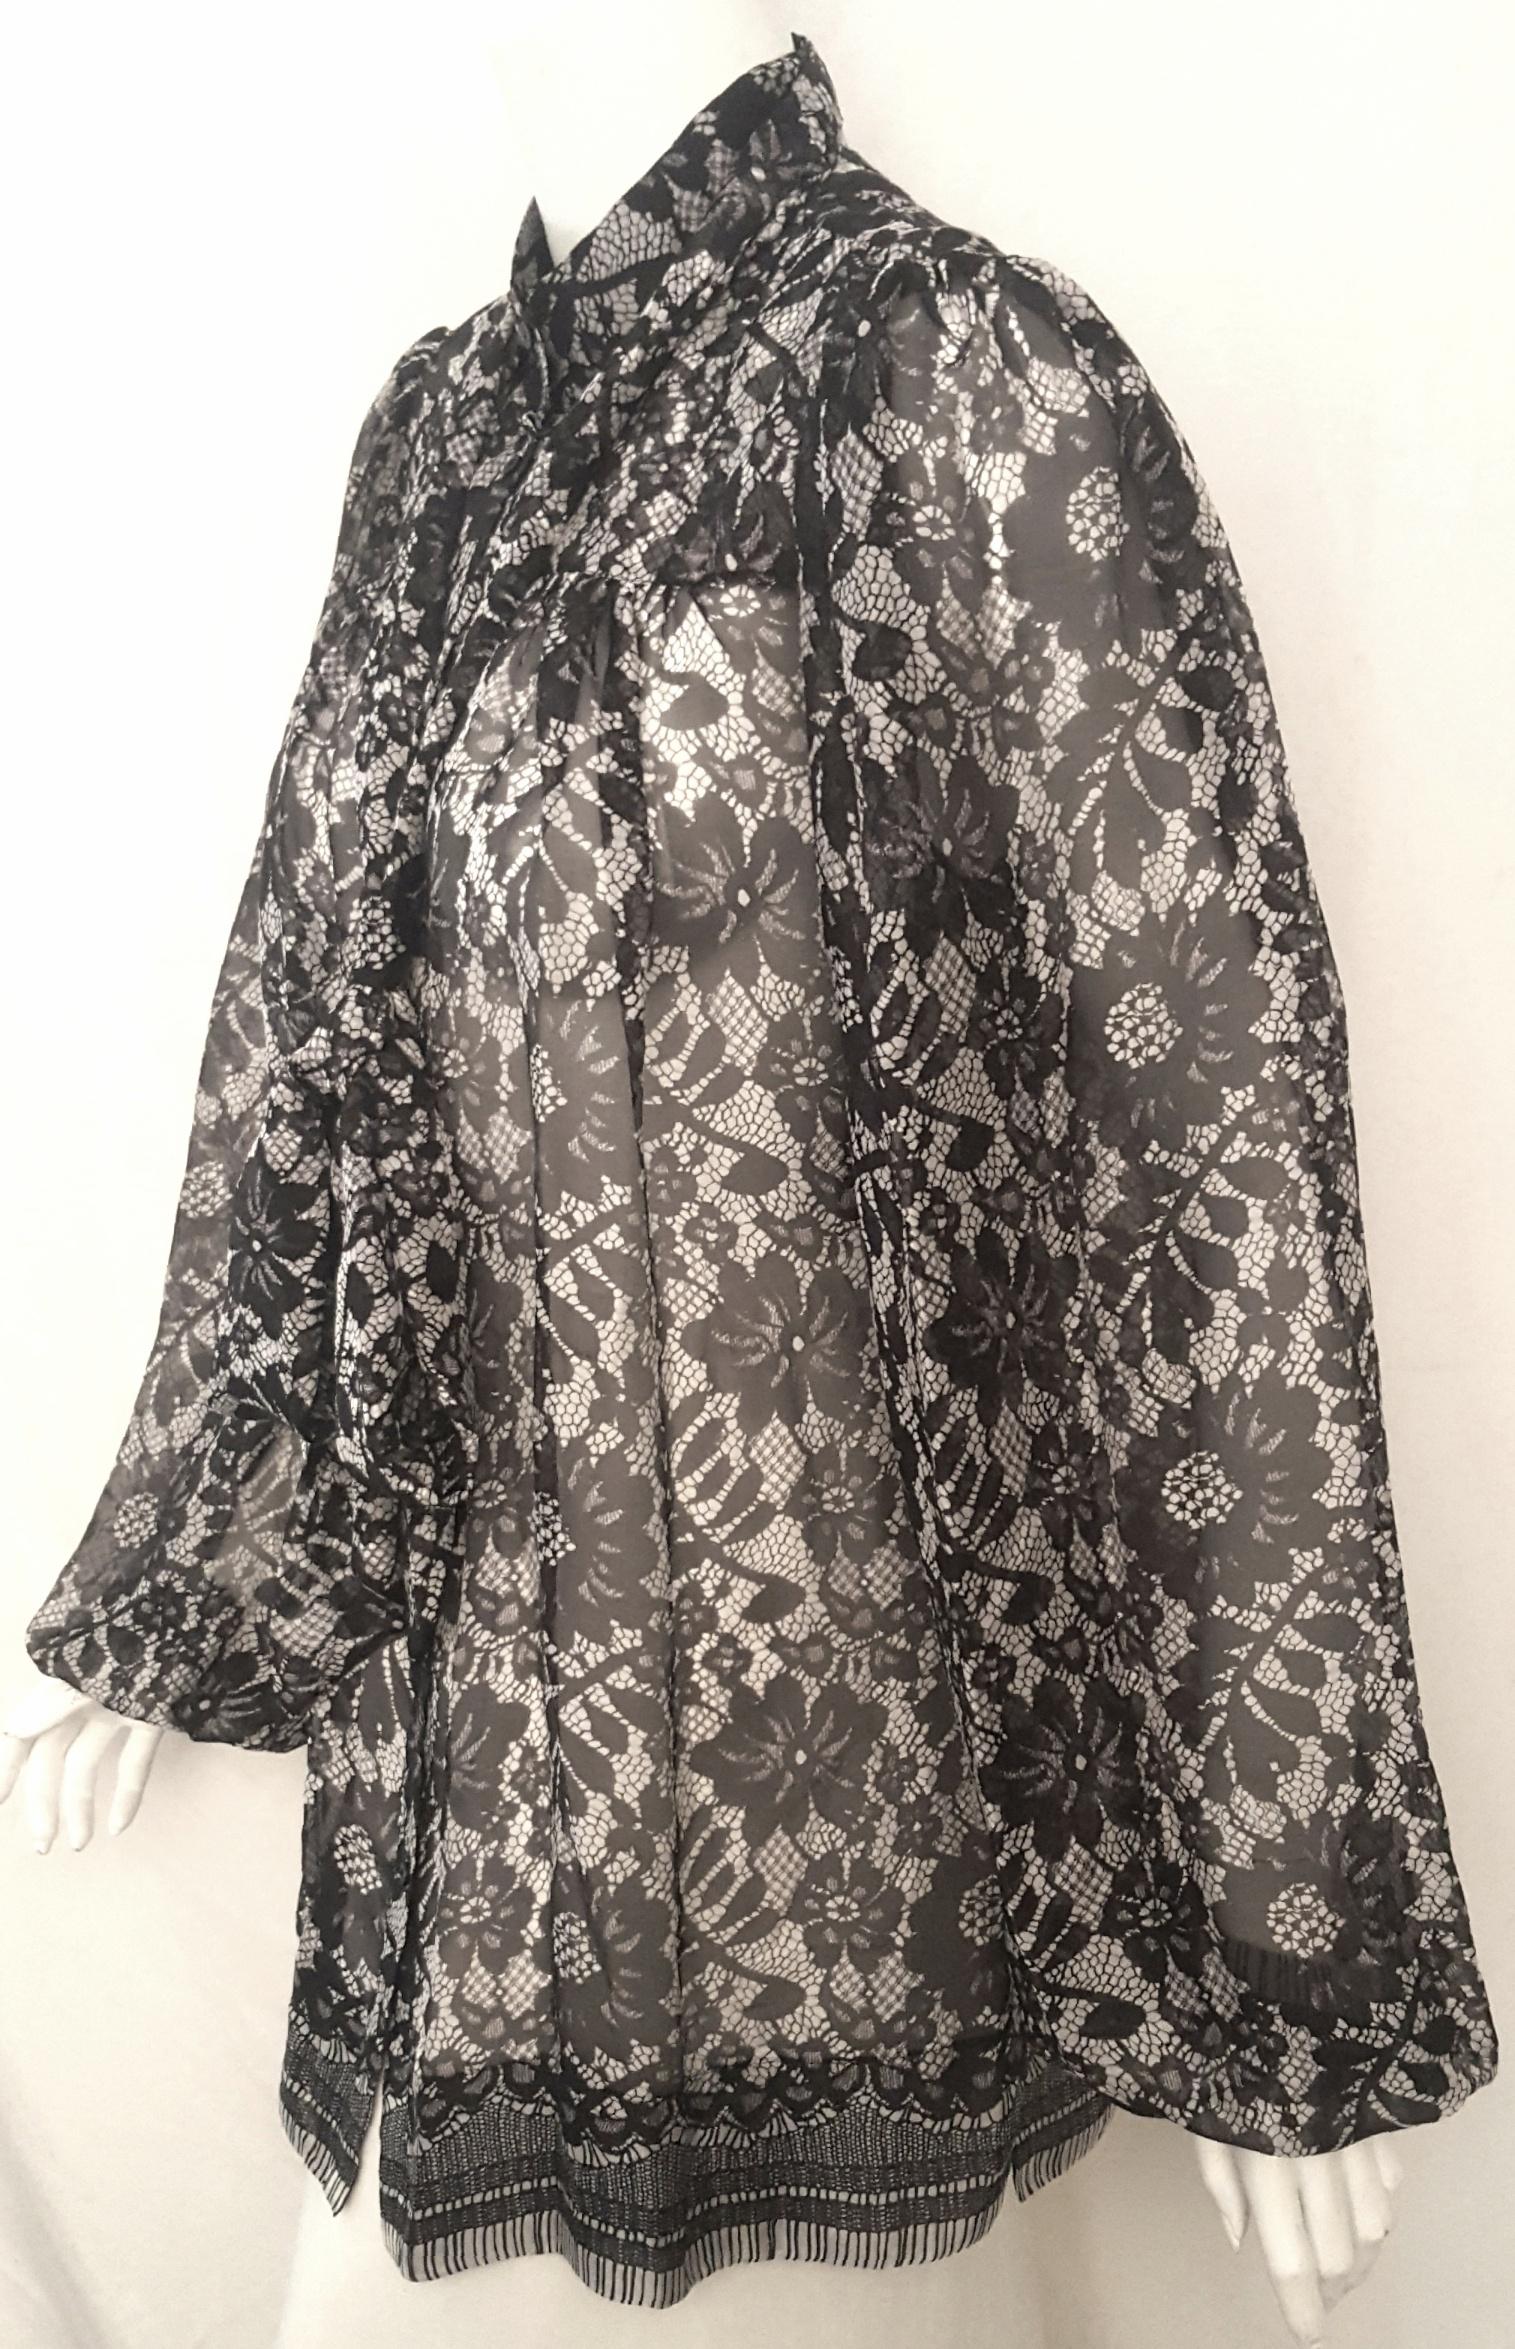 Dolce & Gabbana Black & White Floral Print Long Sleeve Silk Blouse W/ Sash  In Excellent Condition For Sale In Palm Beach, FL